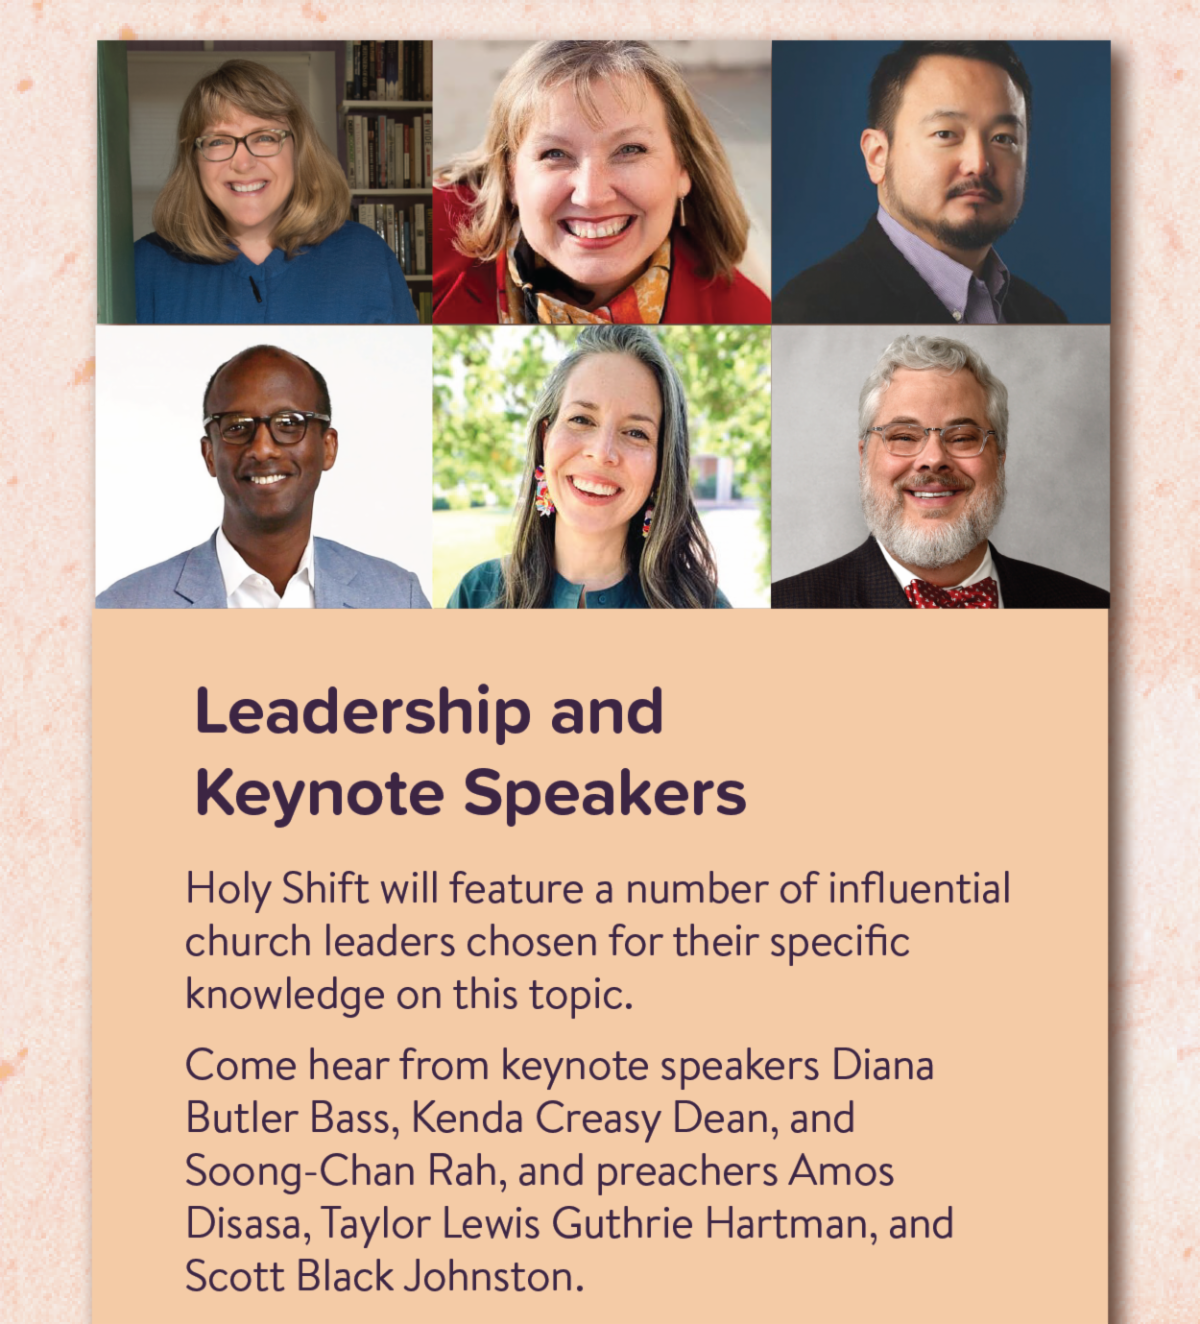 Leadership and Keynote Speakers - Holy Shift will feature a number of influential church leaders chosen for their specific knowledge on this topic. Come hear from keynote speakers Diana Butler Bass, Kenda Creasy Dean, and Soong-Chan Rah, and preachers Amos Disasa, Taylor Lewis Guthrie Hartman, and Scott Black Johnston. 